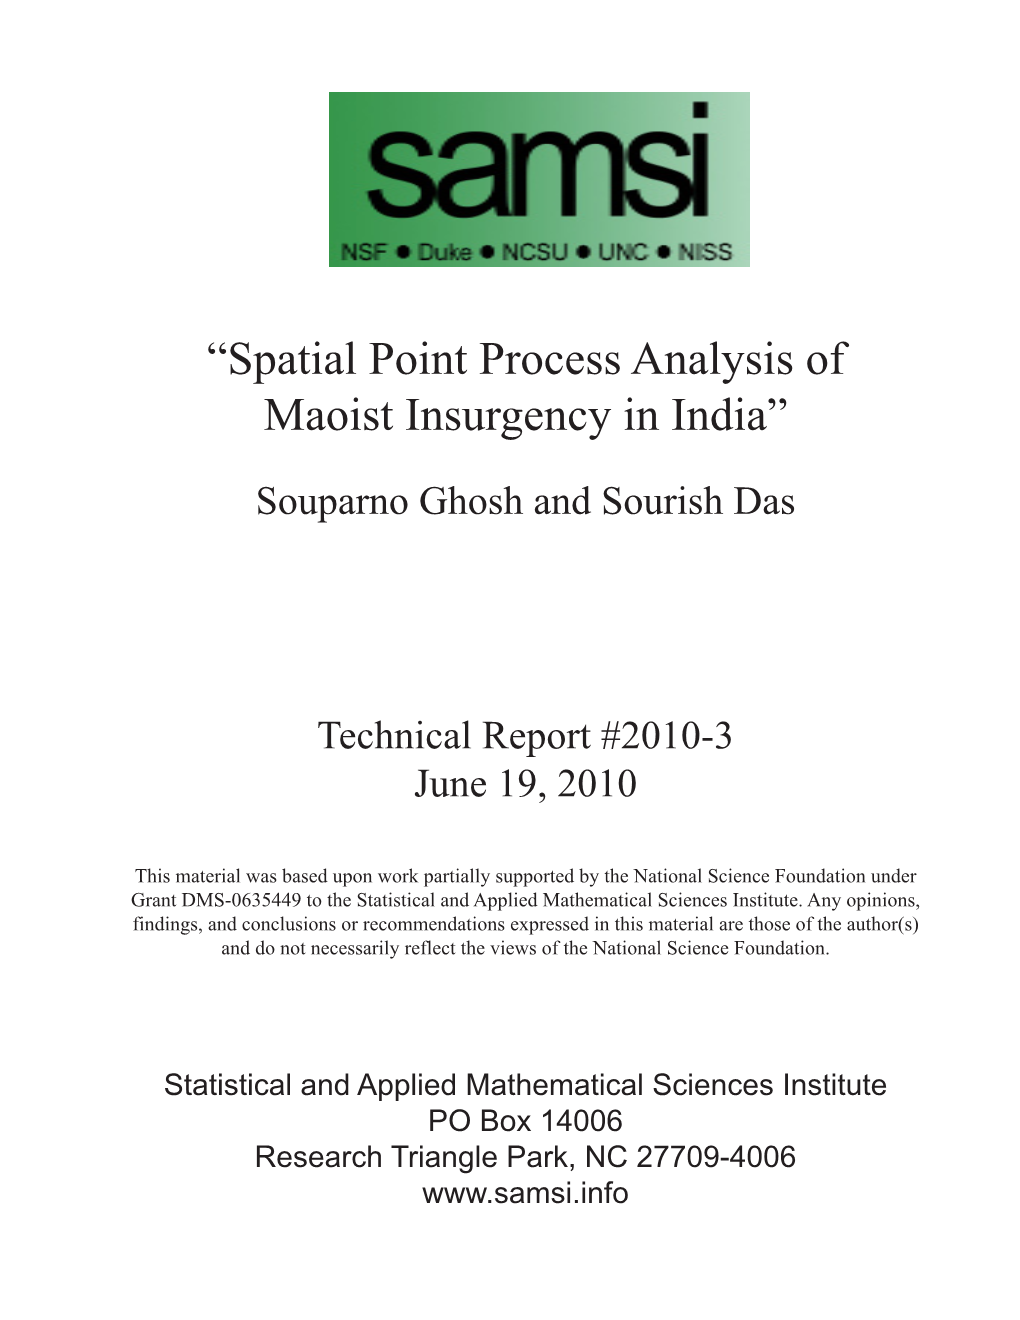 “Spatial Point Process Analysis of Maoist Insurgency in India”